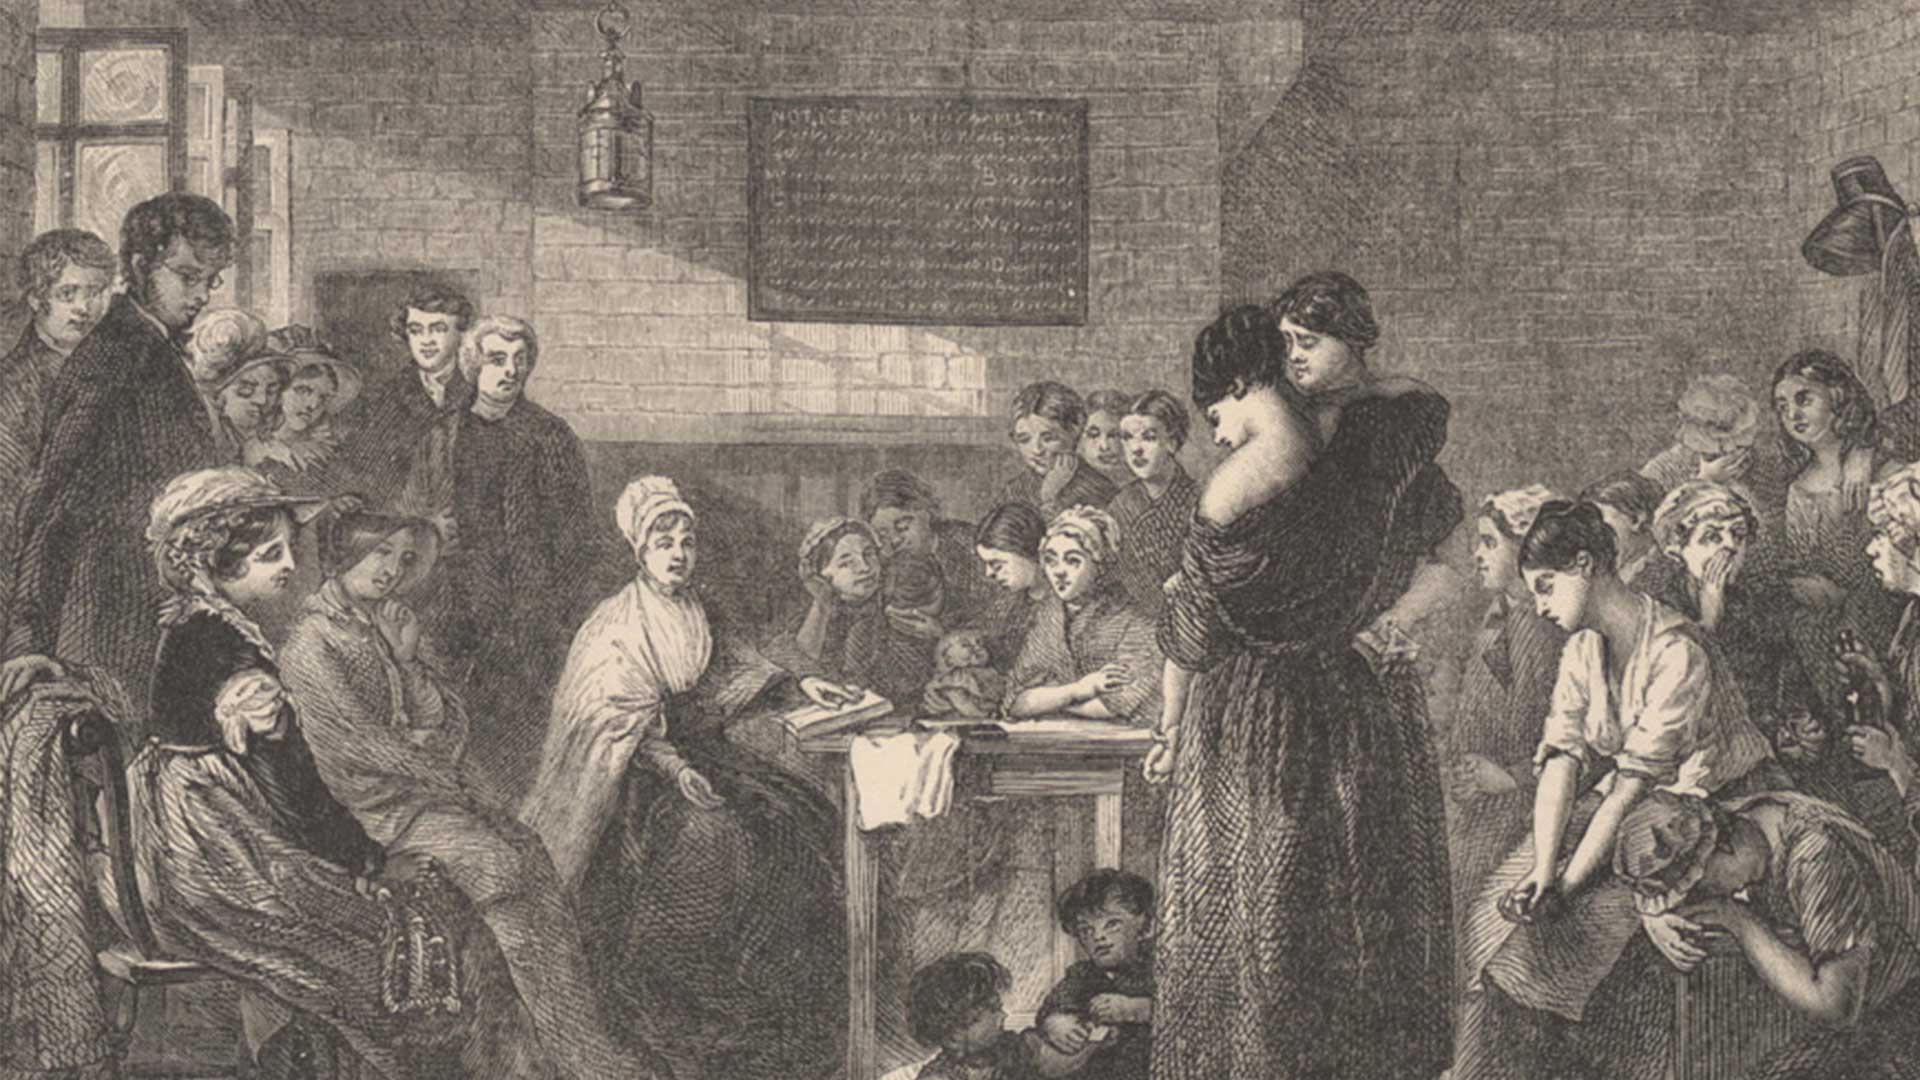 Queen Victoria admired her, but most importantly, thousands of prisoners in England had better lives because of her.